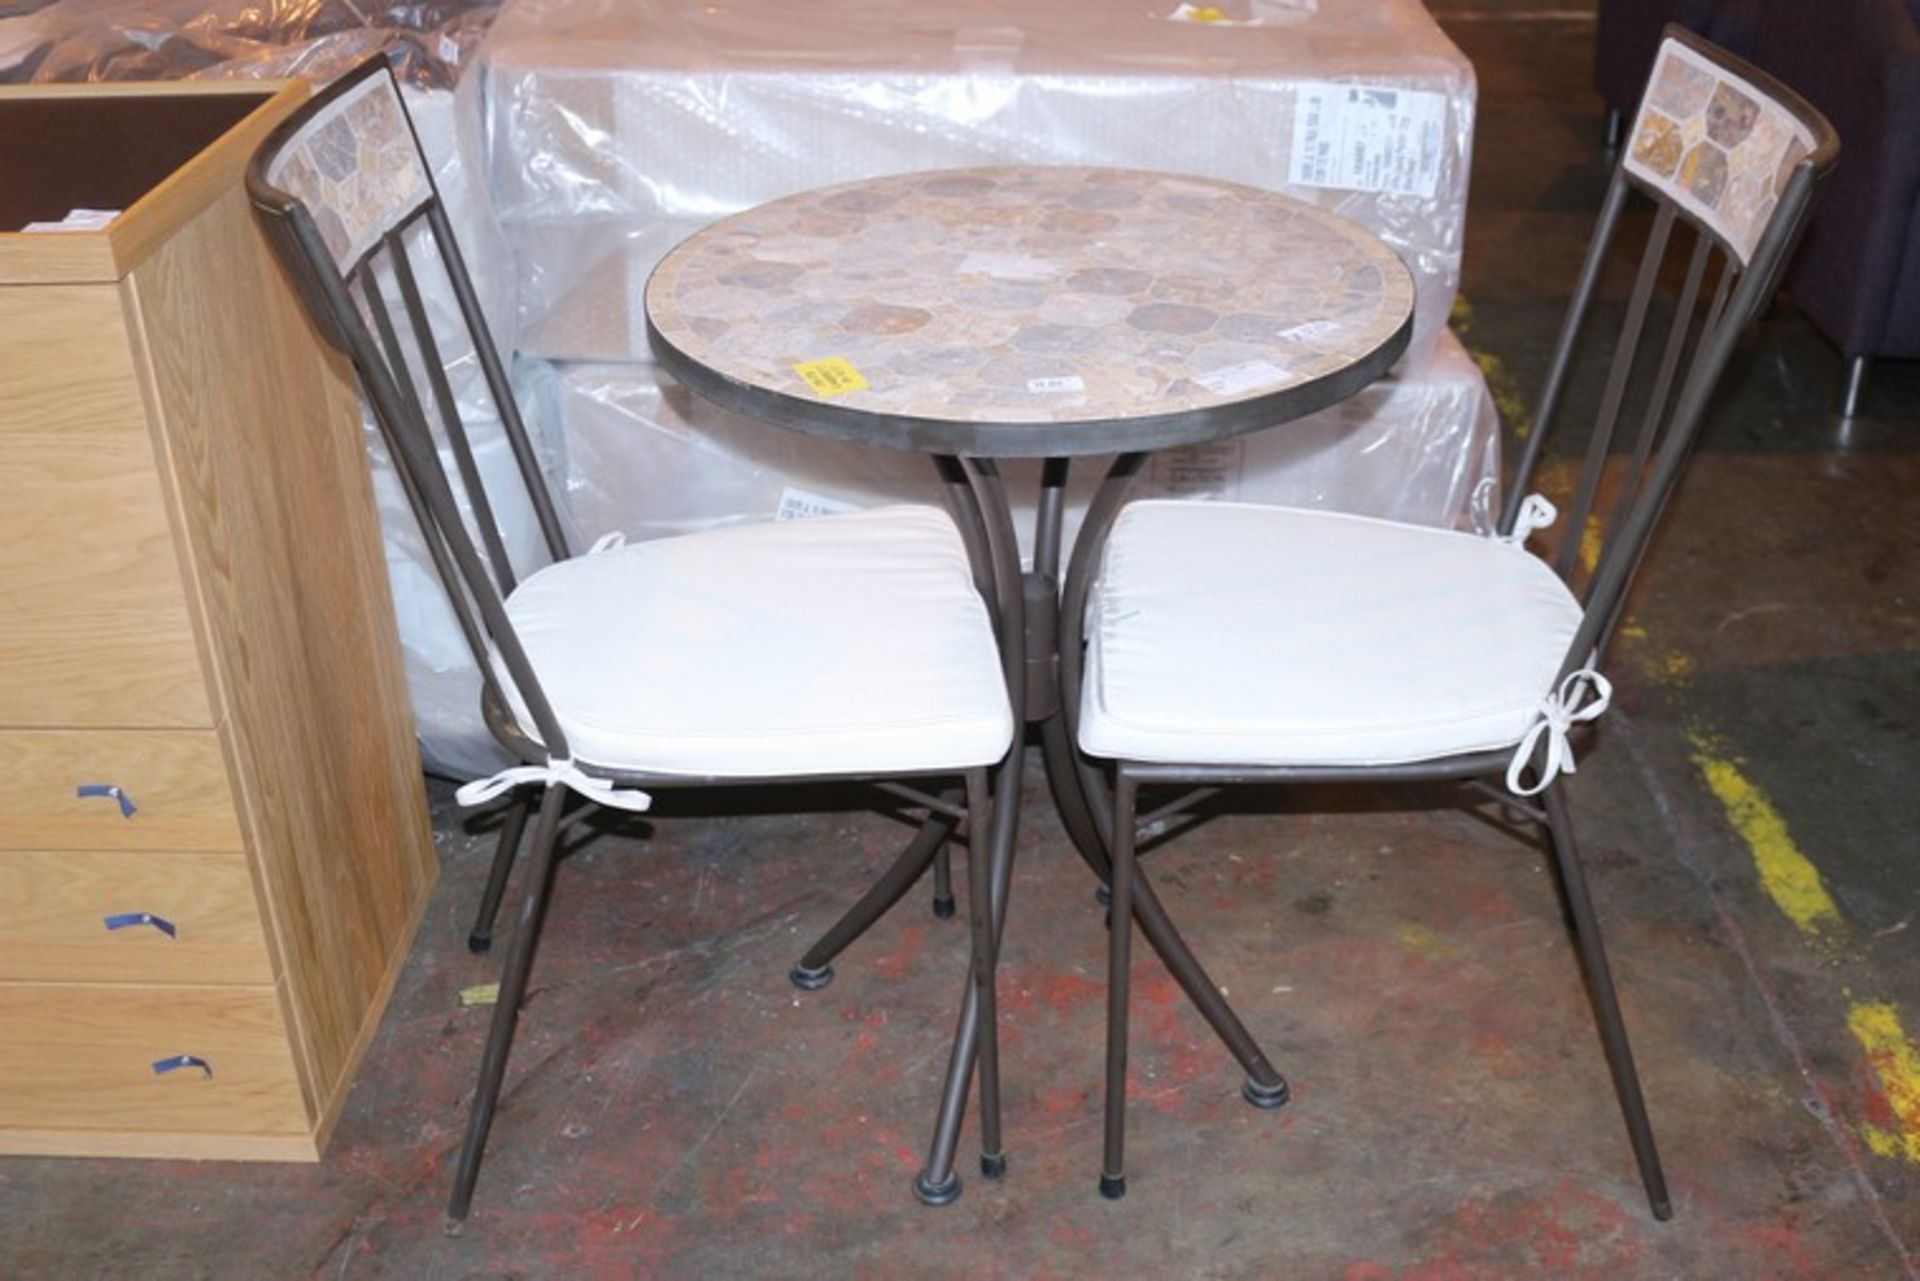 1 x PETRA BISTRO SET TO INCLUDE 2 CHAIRS RRP £330 (09/10/17) (2541344) *PLEASE NOTE THAT THE BID